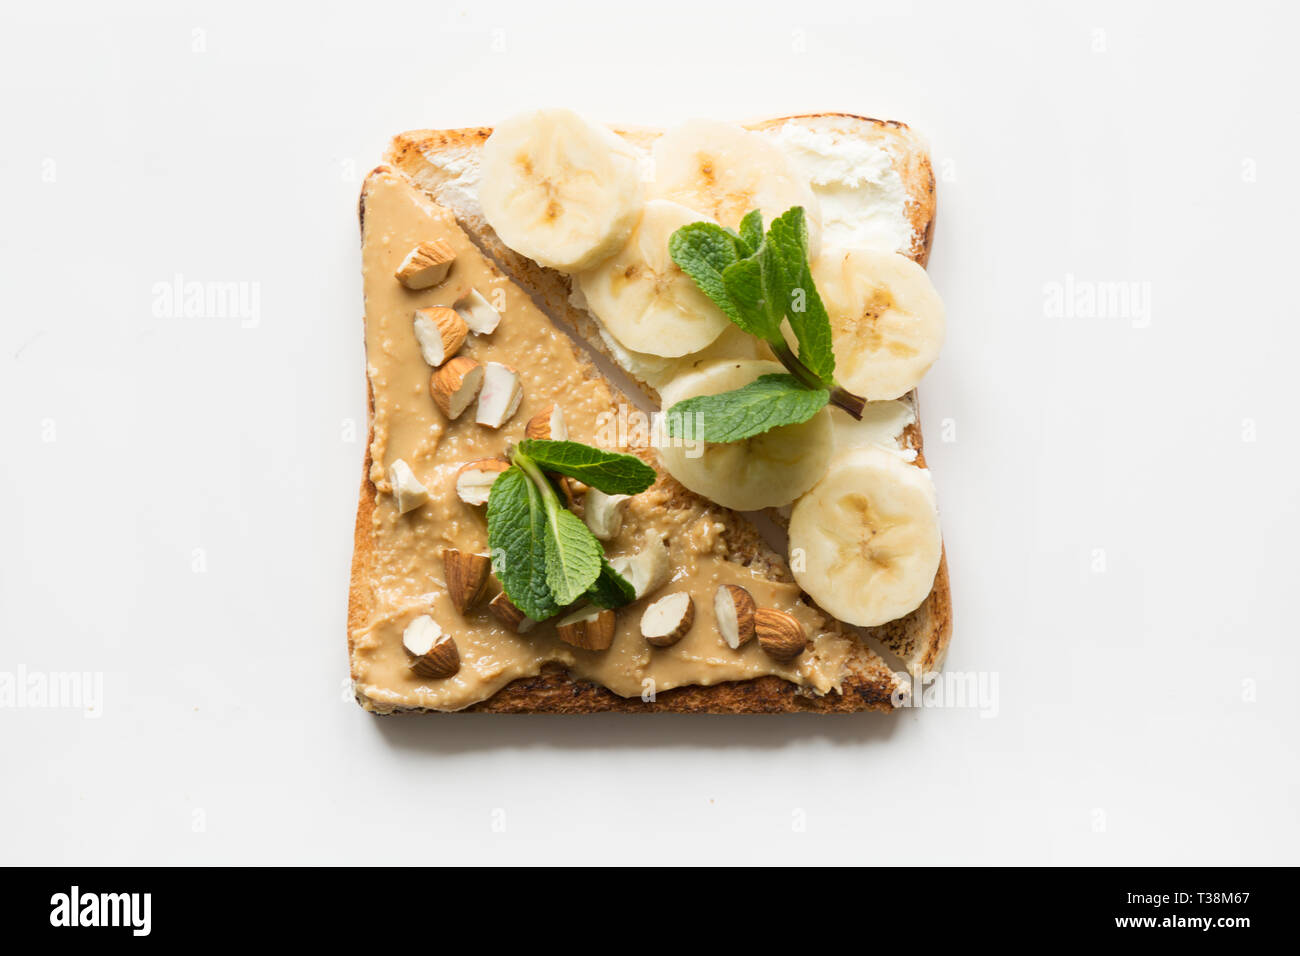 Different types of sandwiches for healthy children's breakfast without sugar, with nut paste, bananas. View from above. Stock Photo